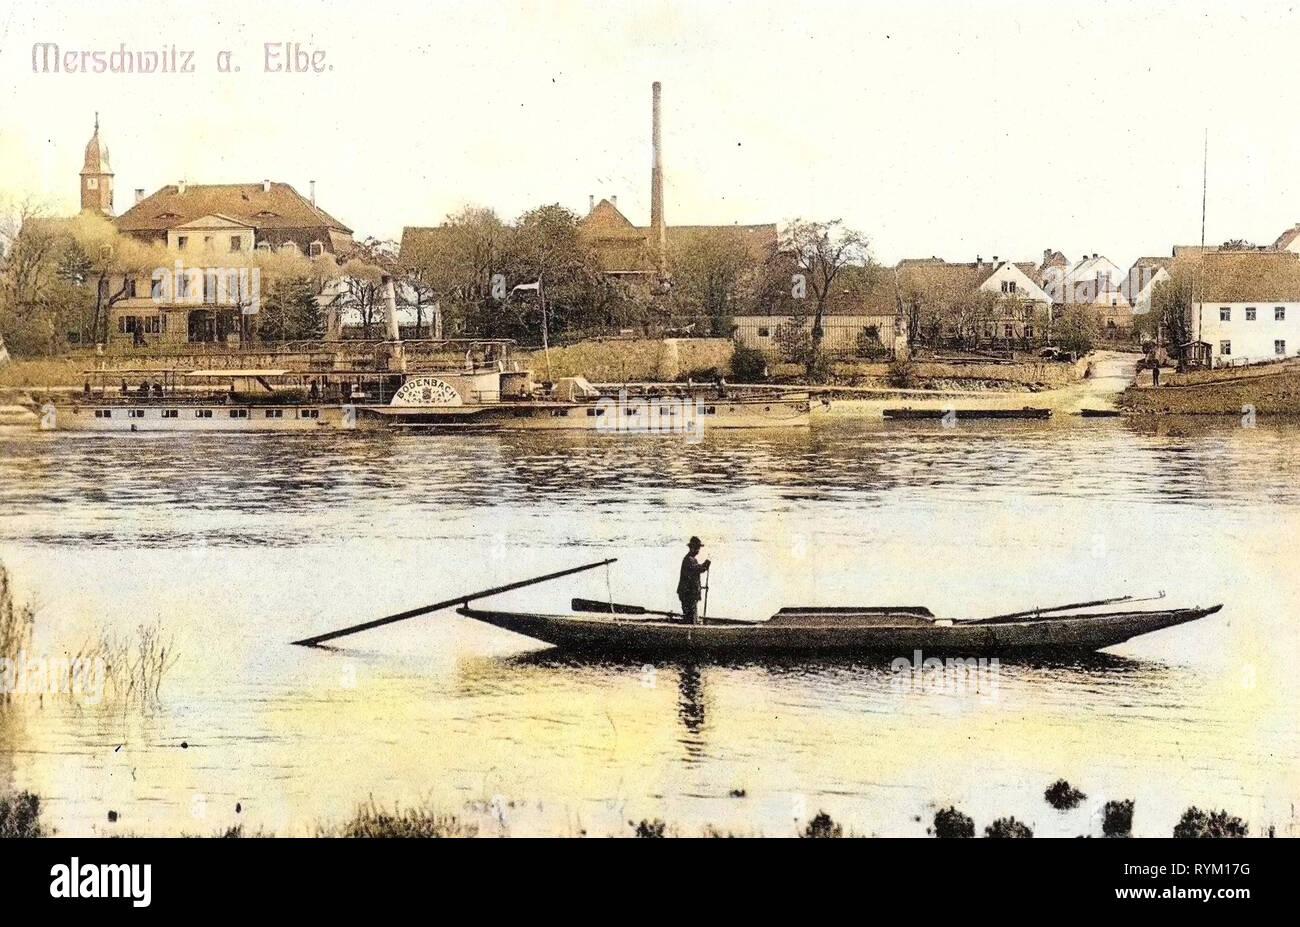 Elbe in Saxony, Bodenbach (ship, 1896), Rowboats in Germany, Churches in Landkreis Meißen, Poled boats, 1906, Landkreis Meißen, Merschwitz, Elbe mit Dampfer Bodenbach und Ortsansicht Stock Photo